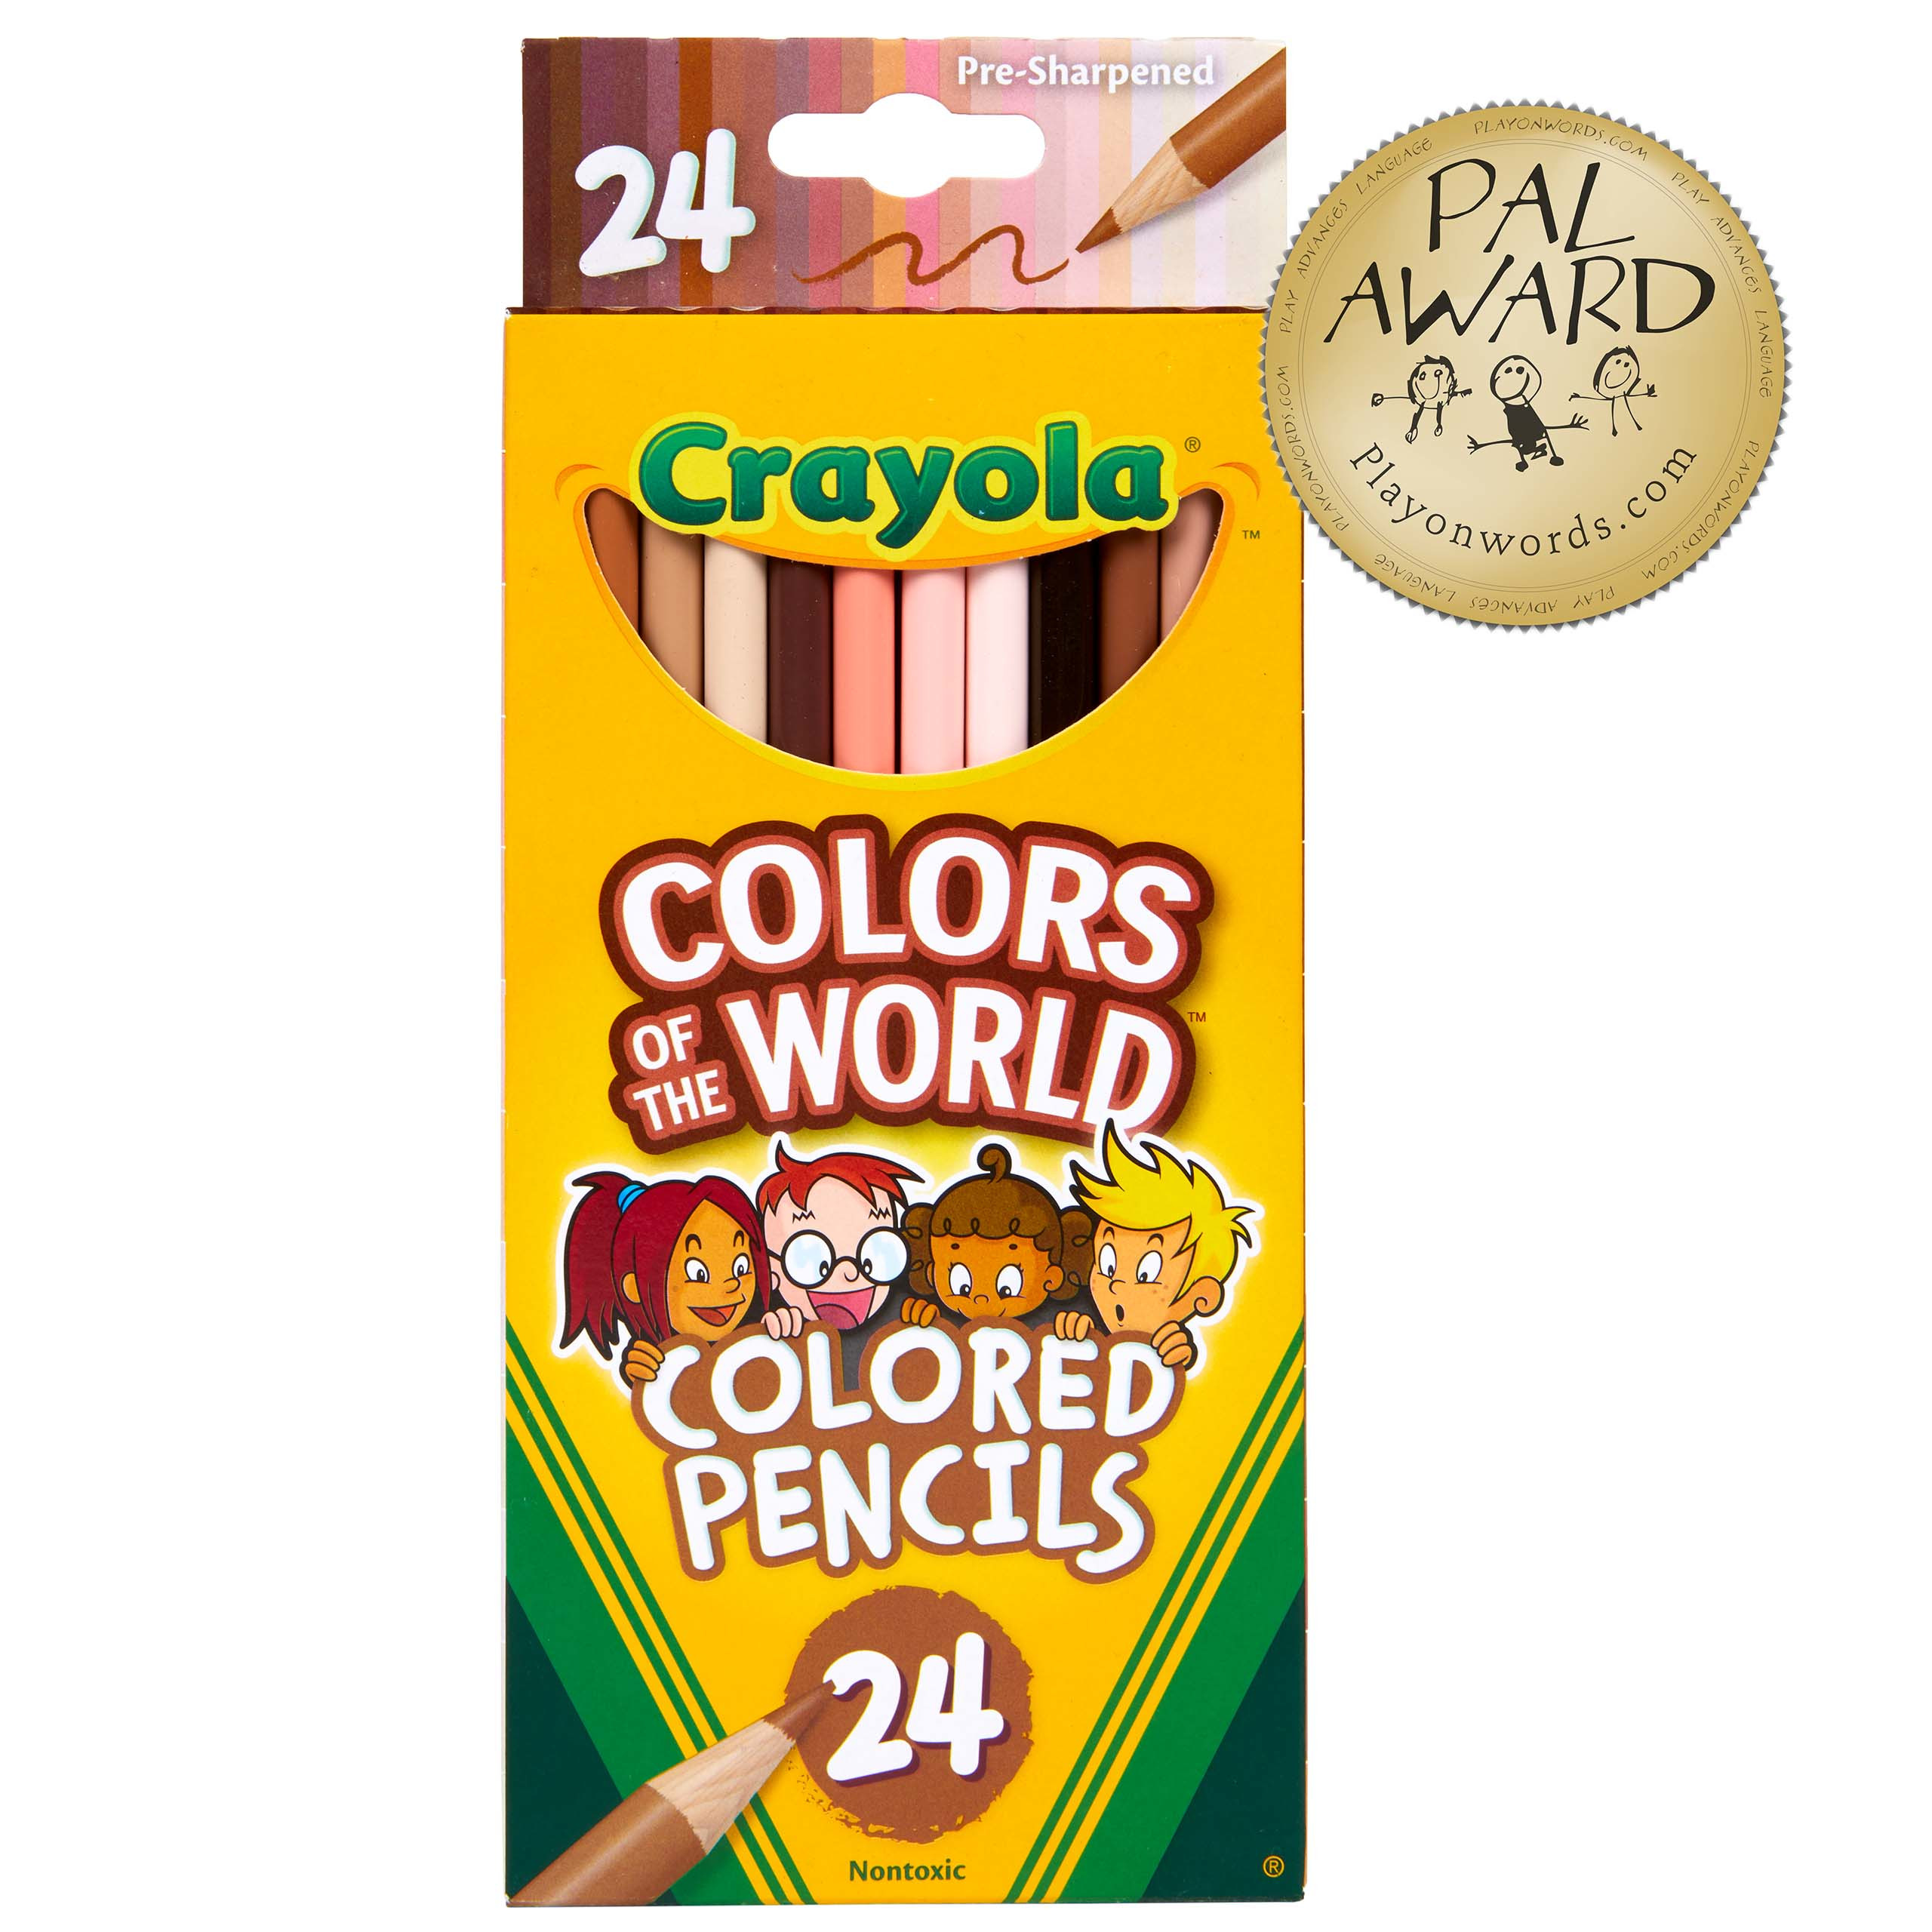 Crayola Colored Pencils 24 Pack, Colors of the World, Skin Tone Colored Pencils, 24 Colors, Child - image 3 of 8